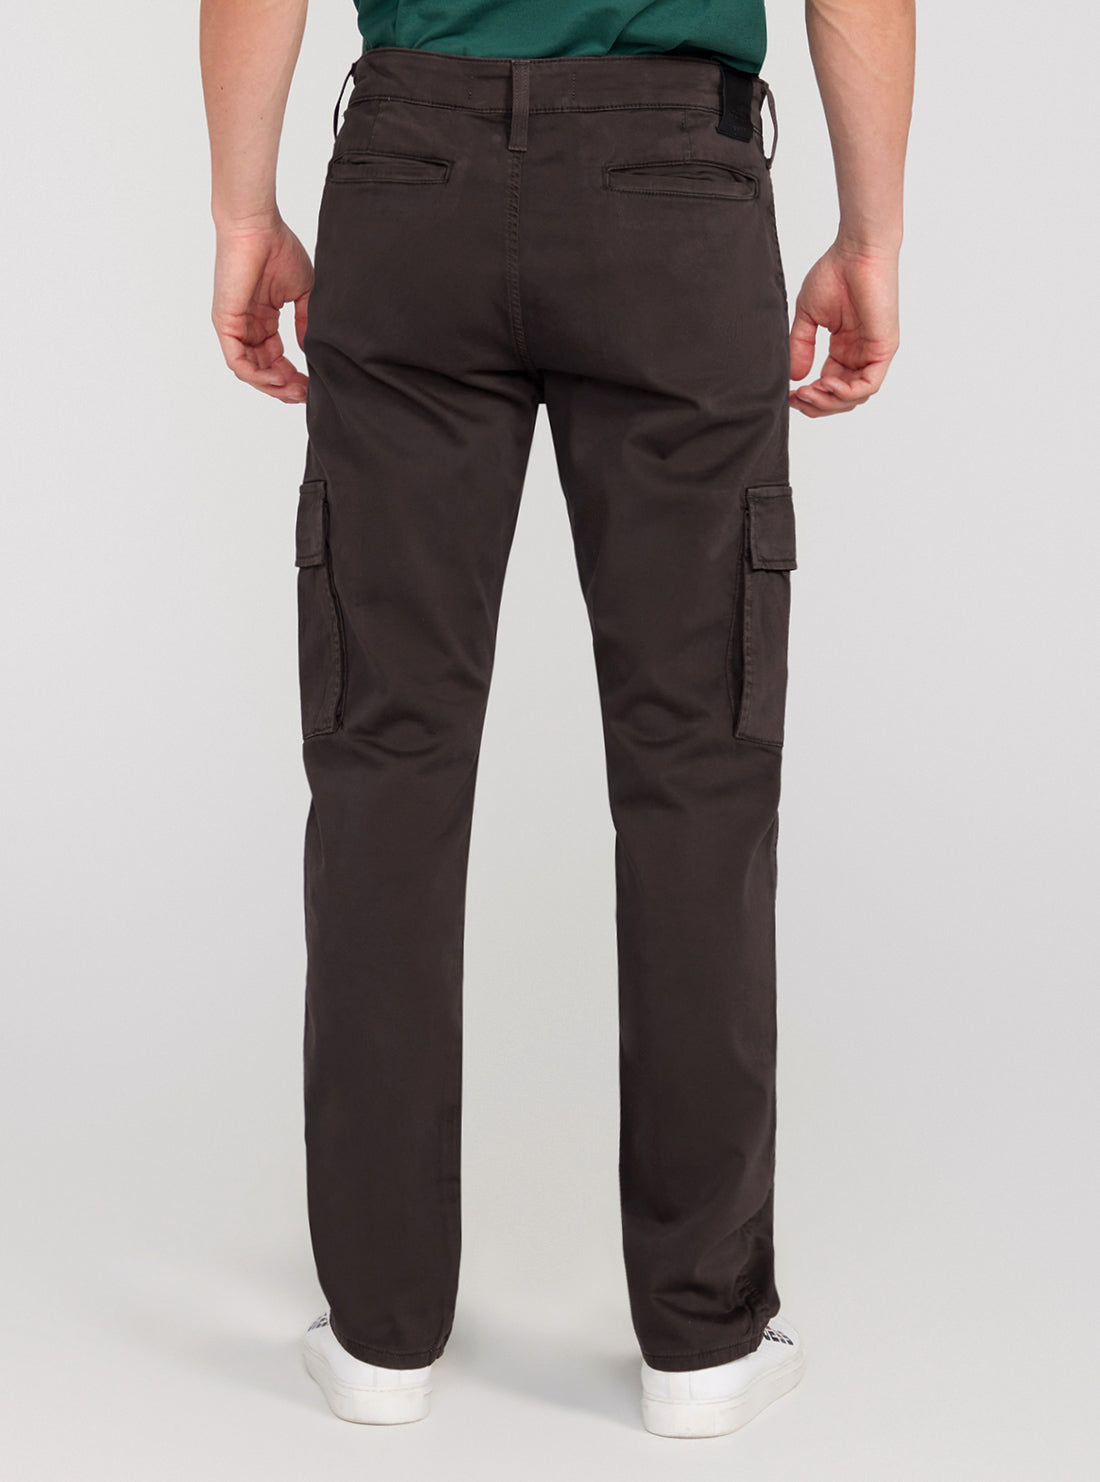 GUESS Brown Sateen Coated Cargo Pants back view